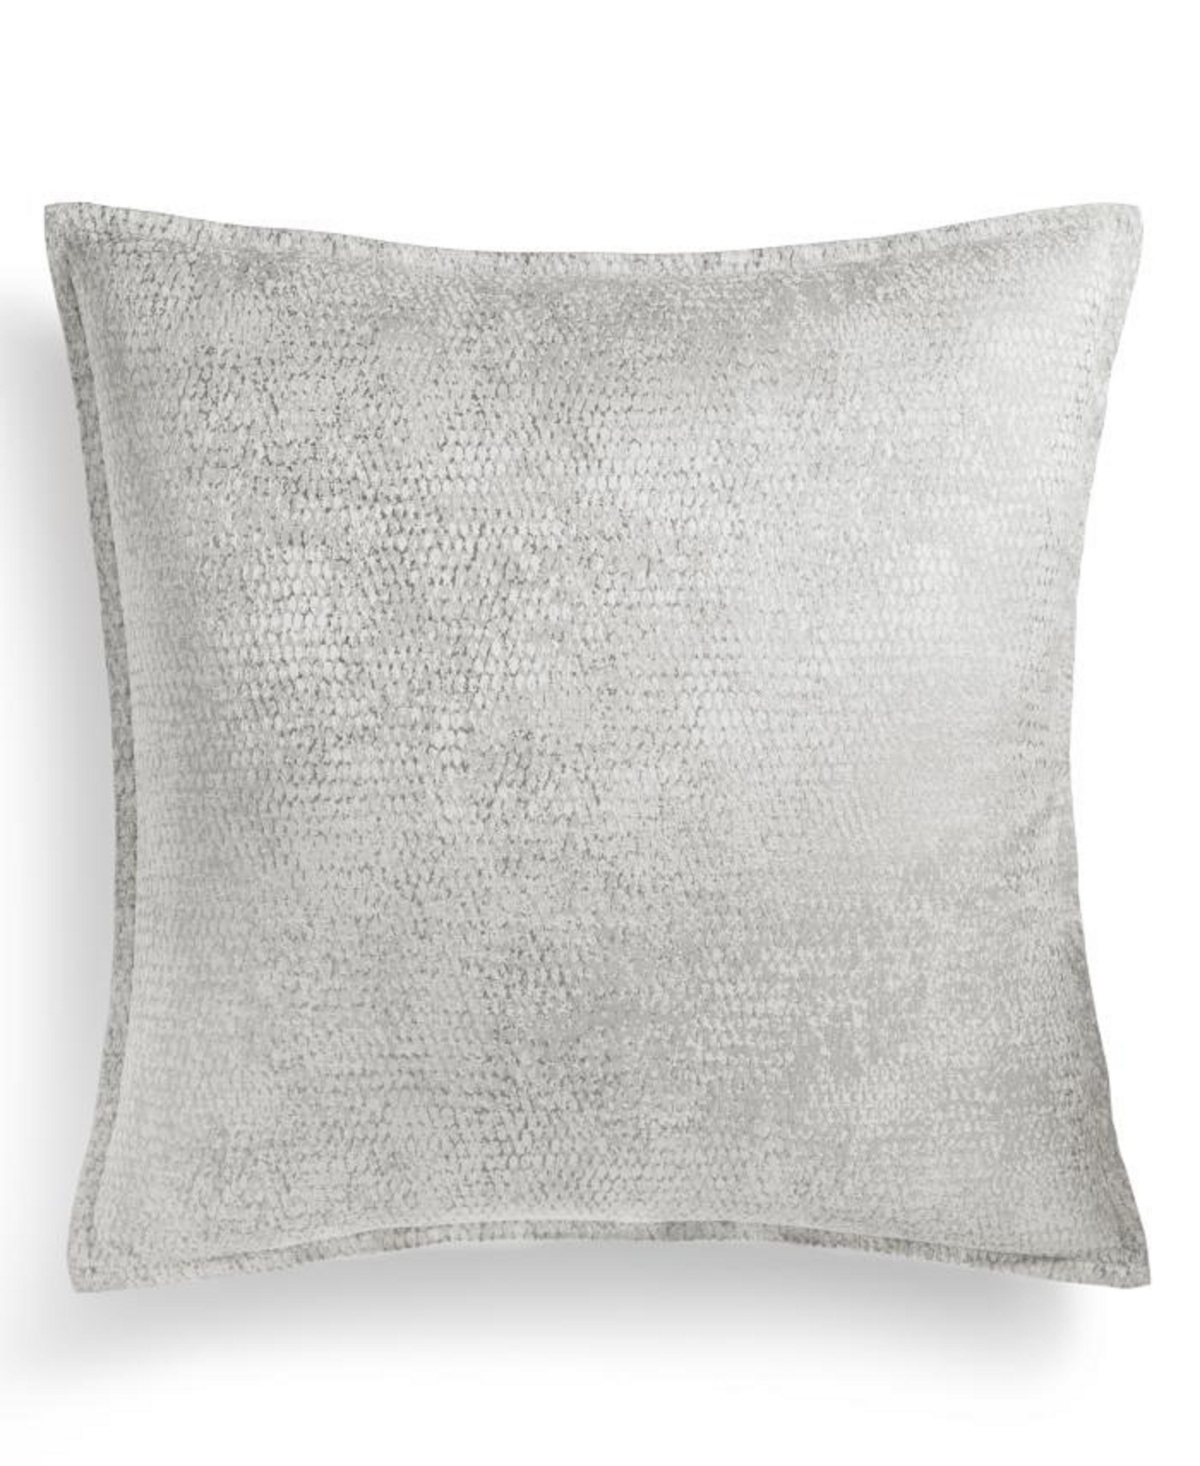 Closeout! Hotel Collection Tessellate Sham, European, Created for Macy's - Light Gray